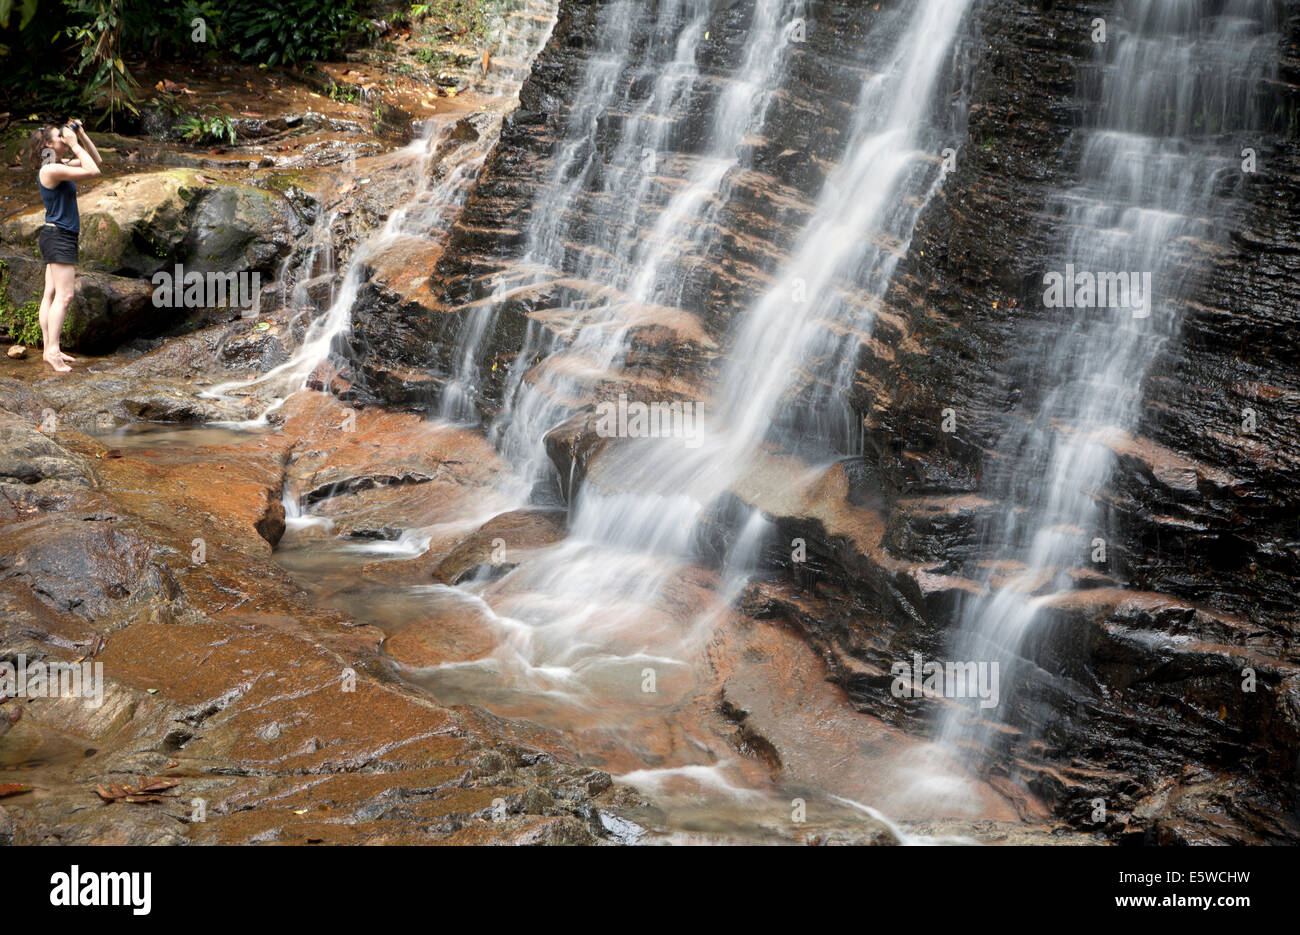 Girl taking photo of waterfall in tropical rainforest region of Borneo. Long exposure photography effect creates silky smooth waterfalls with woman Stock Photo